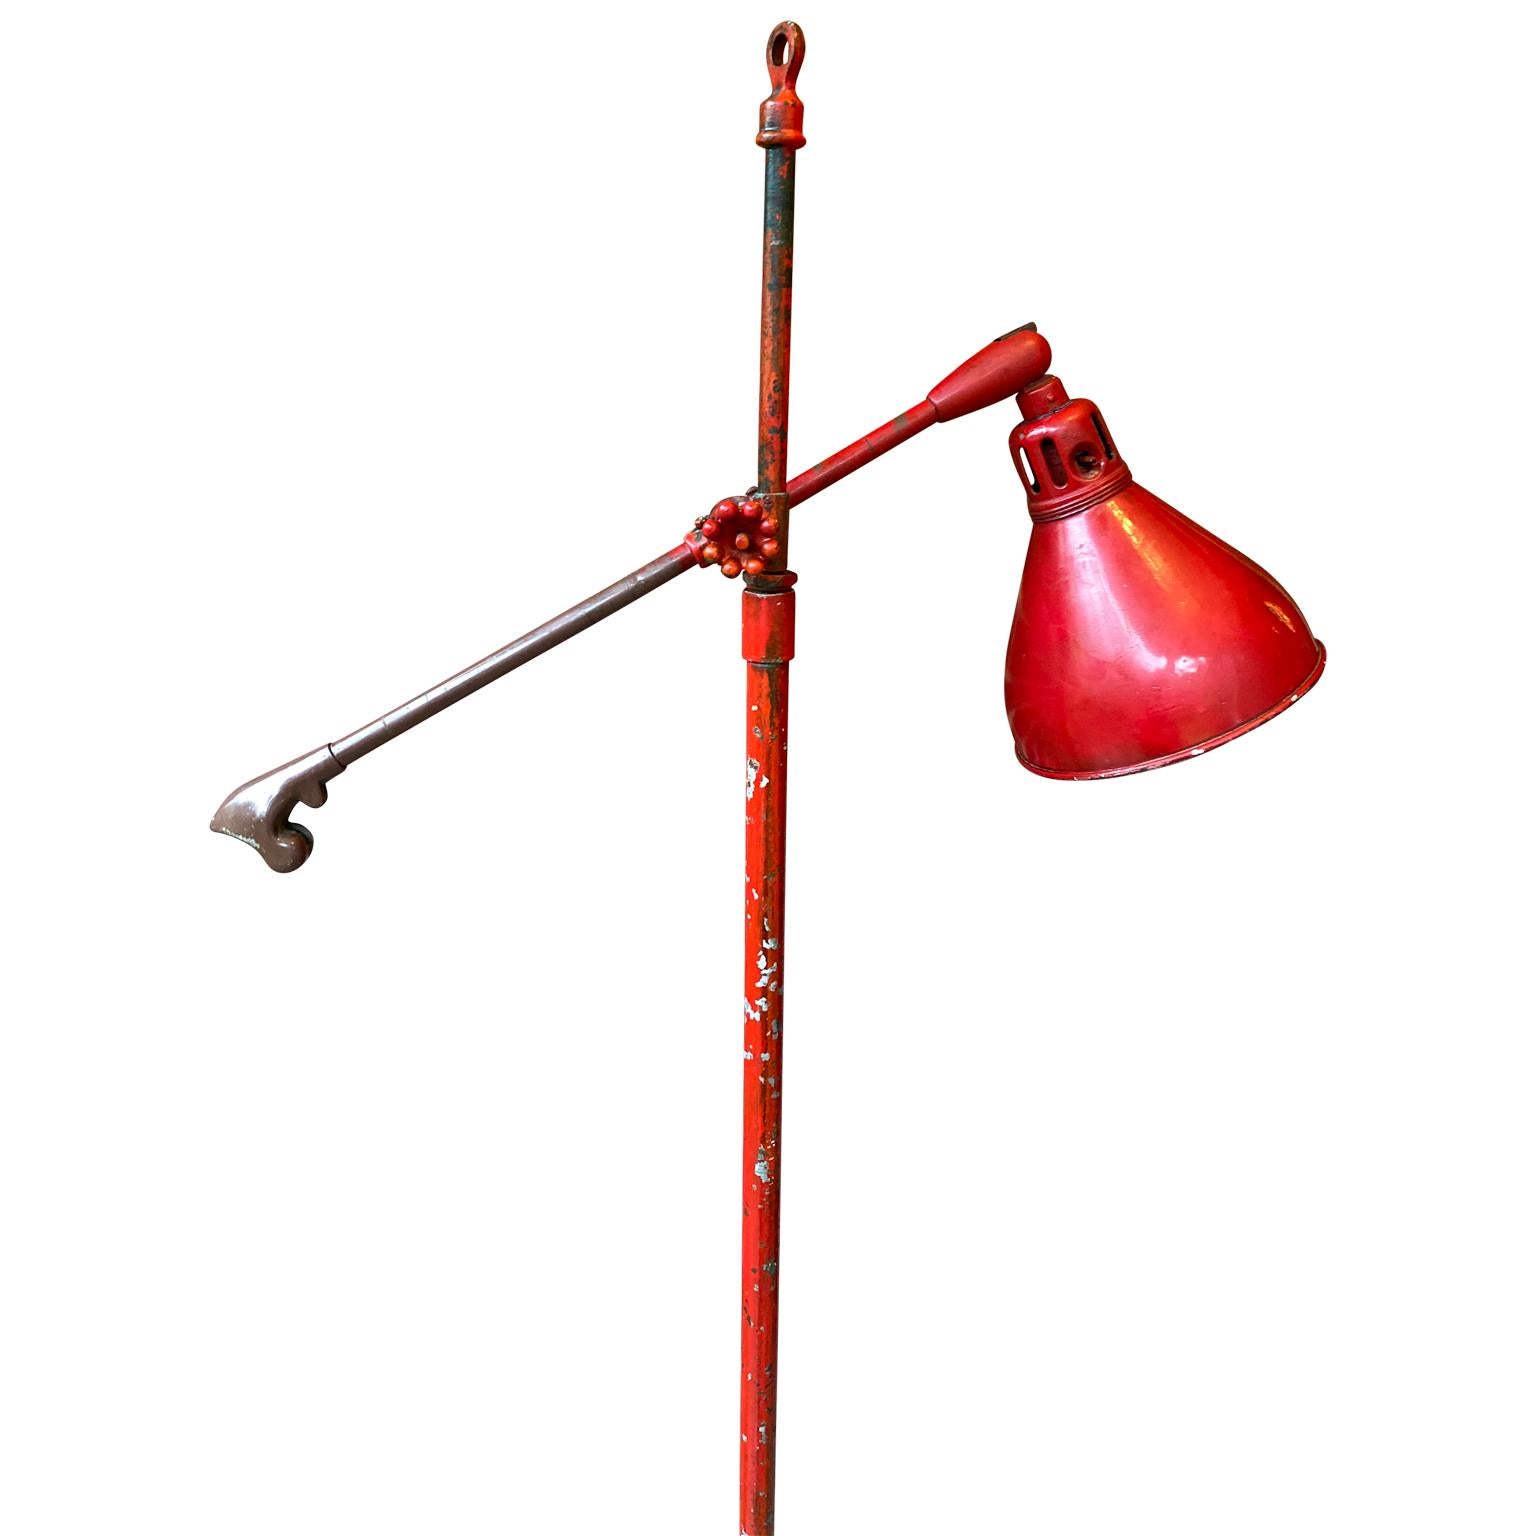 Large adjustable industrial floor lamp featuring the original base.

The iron lamp is painted in red and signed O. C. WHITE ROCHESTER MASSACHUSEETTS.